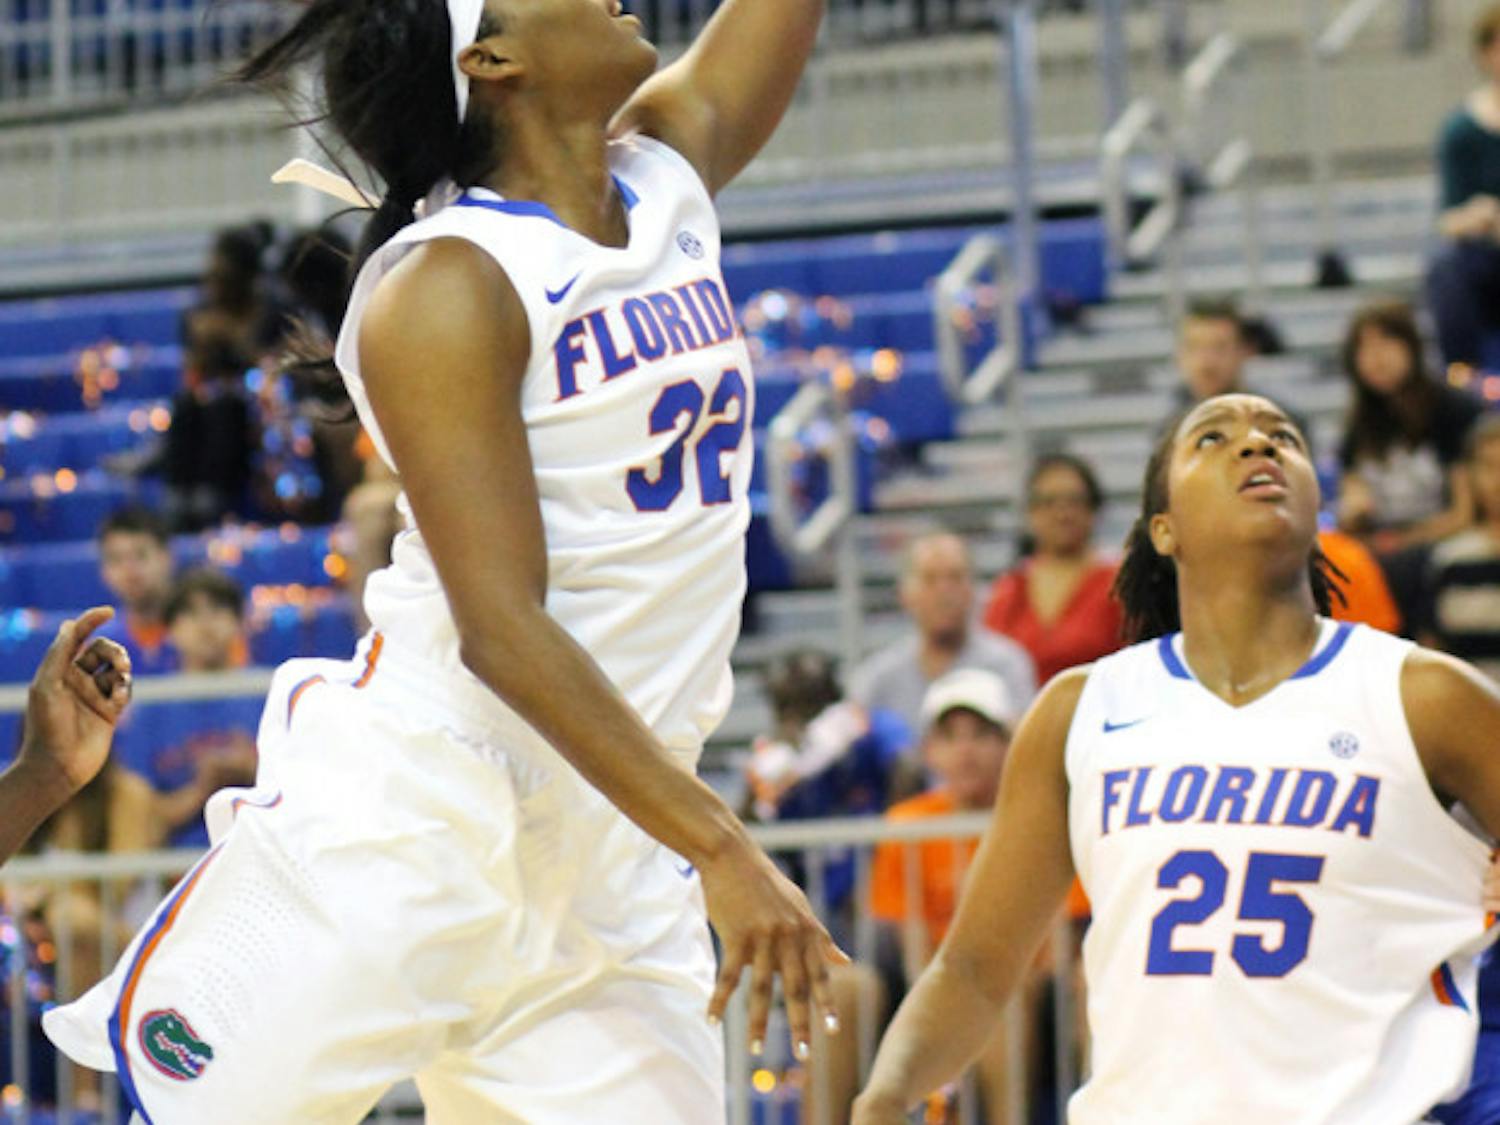 Forward Jennifer George attempts a shot in Florida’s 84-65 win against Georgia State on Nov. 11 in the O’Connell Center. In order to improve three-point shooting, coach Amanda Butler wants the Gators to establish the paint more with post players such as George.
